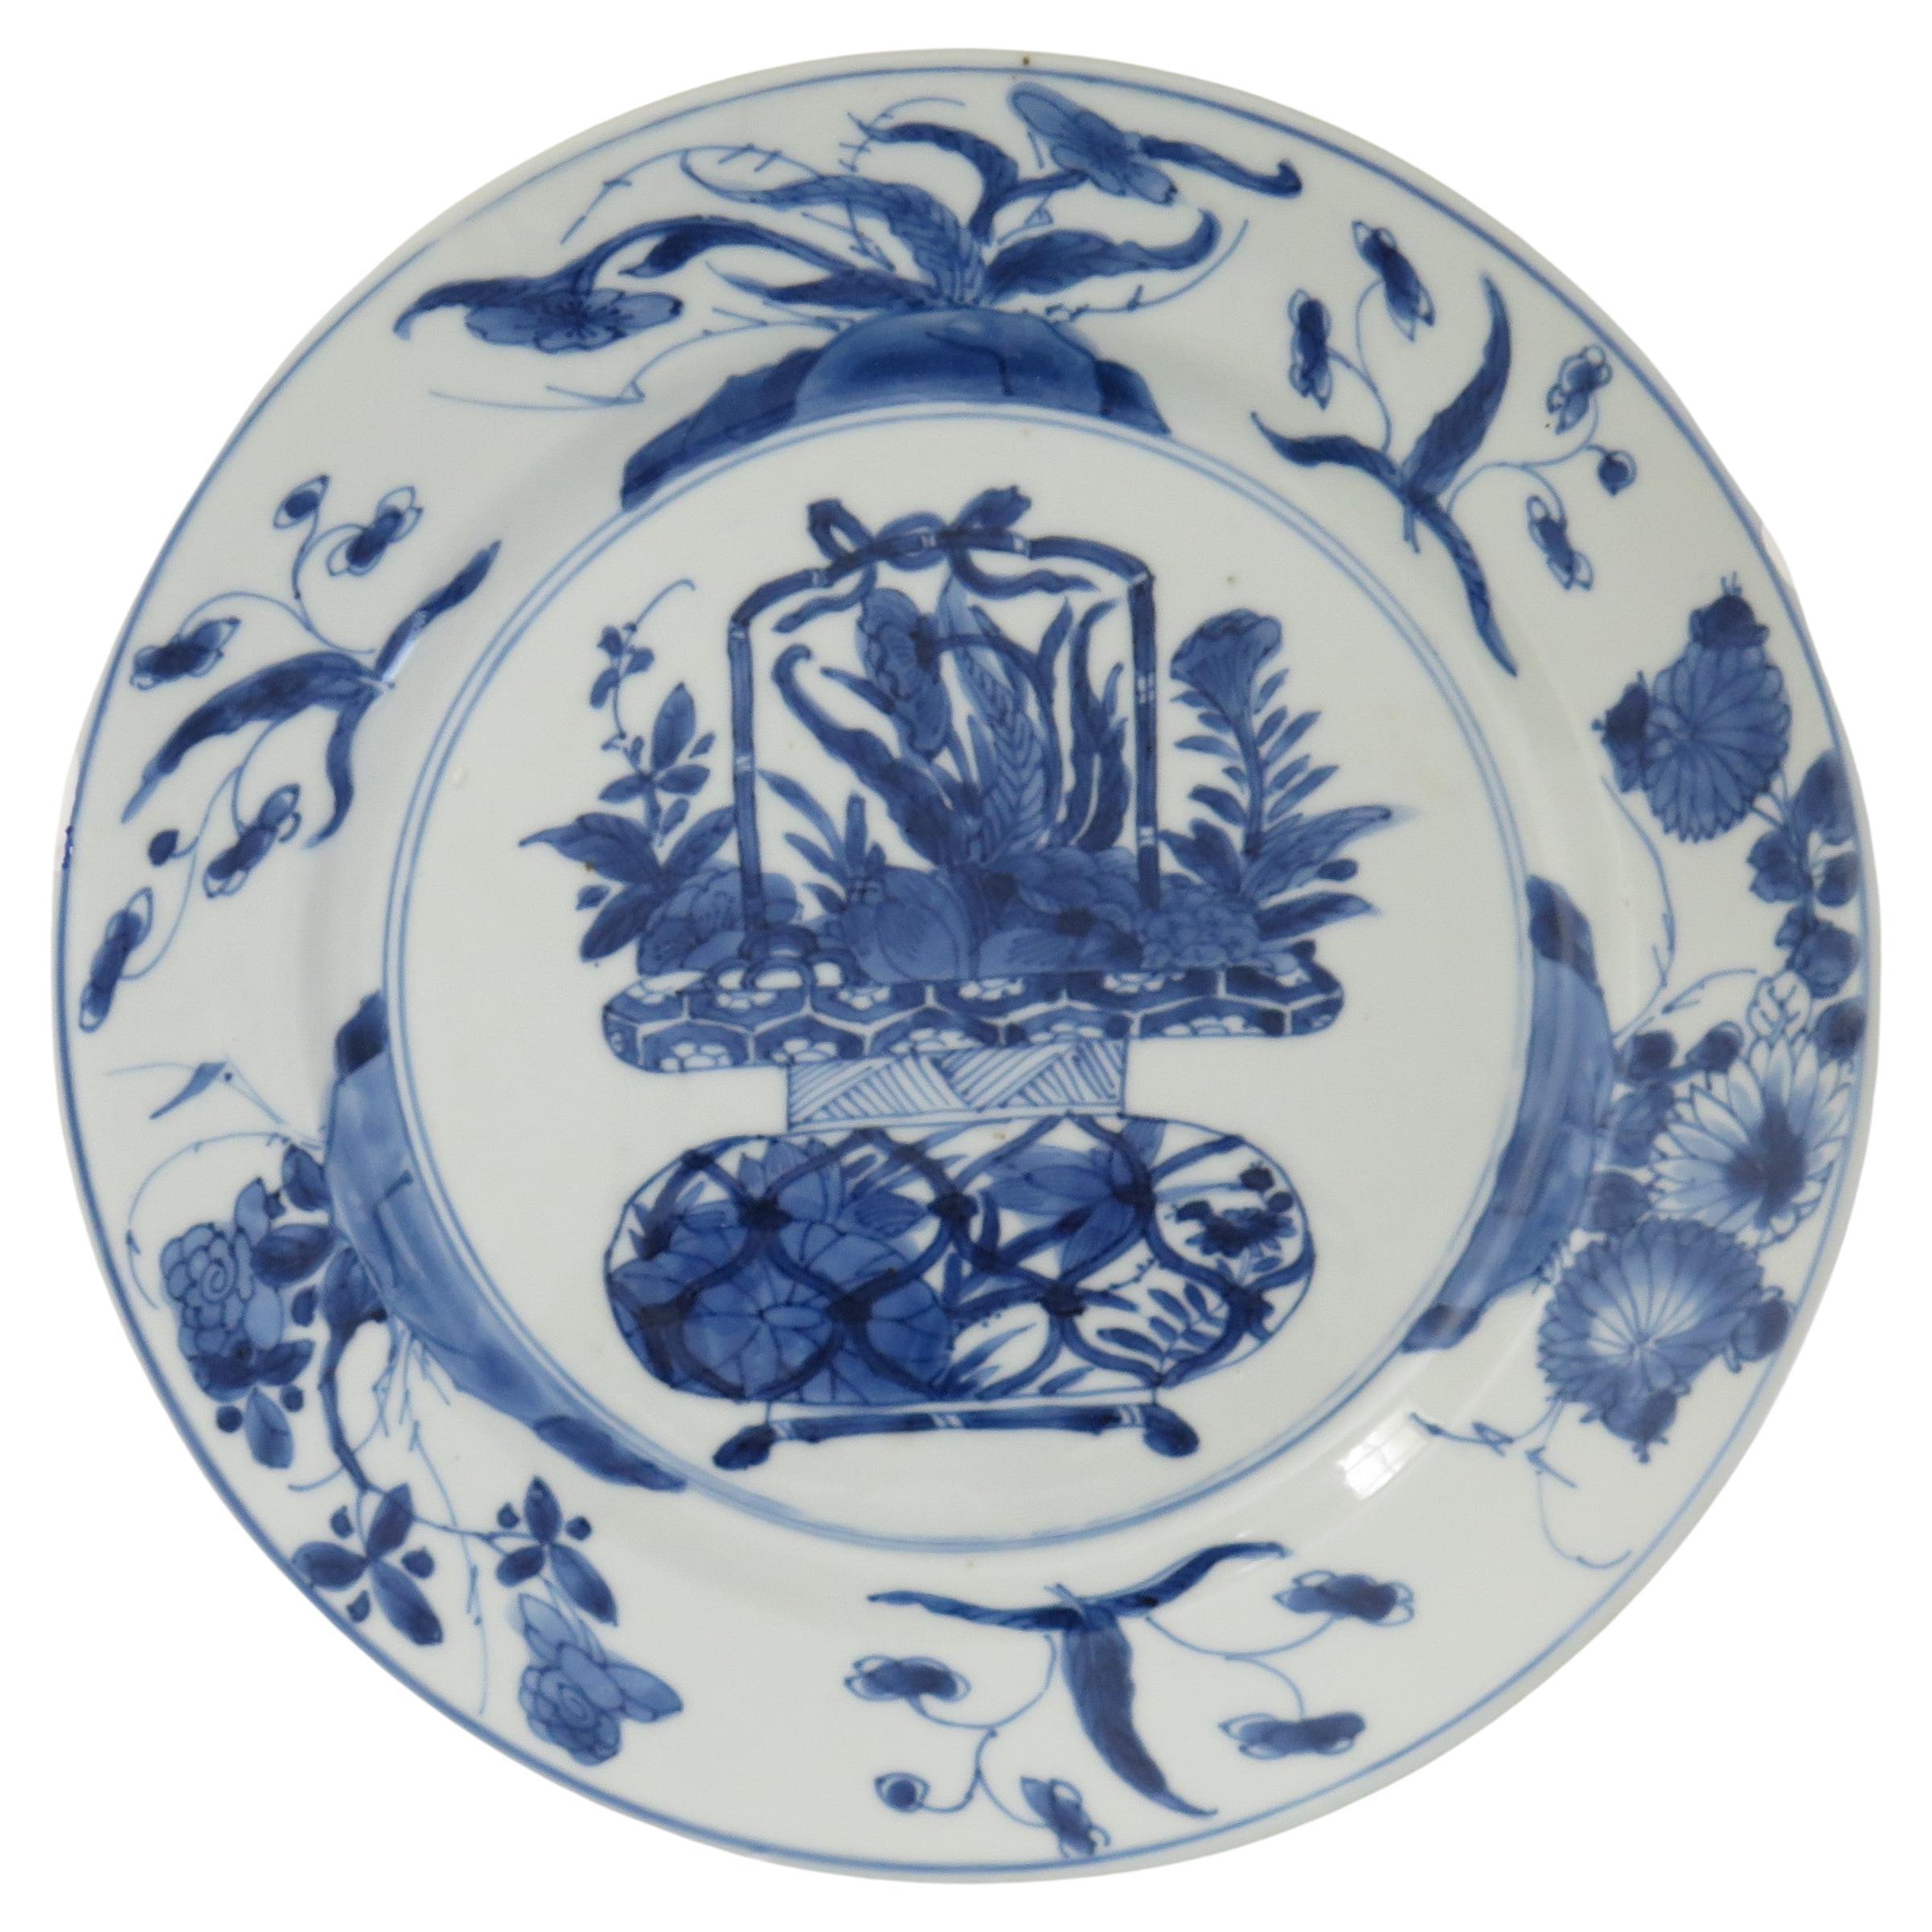 This is a beautifully hand-painted Chinese porcelain blue and white plate, from the Qing, Kangxi period, 1662-1722.

The plate is finely potted with a carefully cut base rim and a lovely rich glassy, very light blue glaze and very white porcelain,